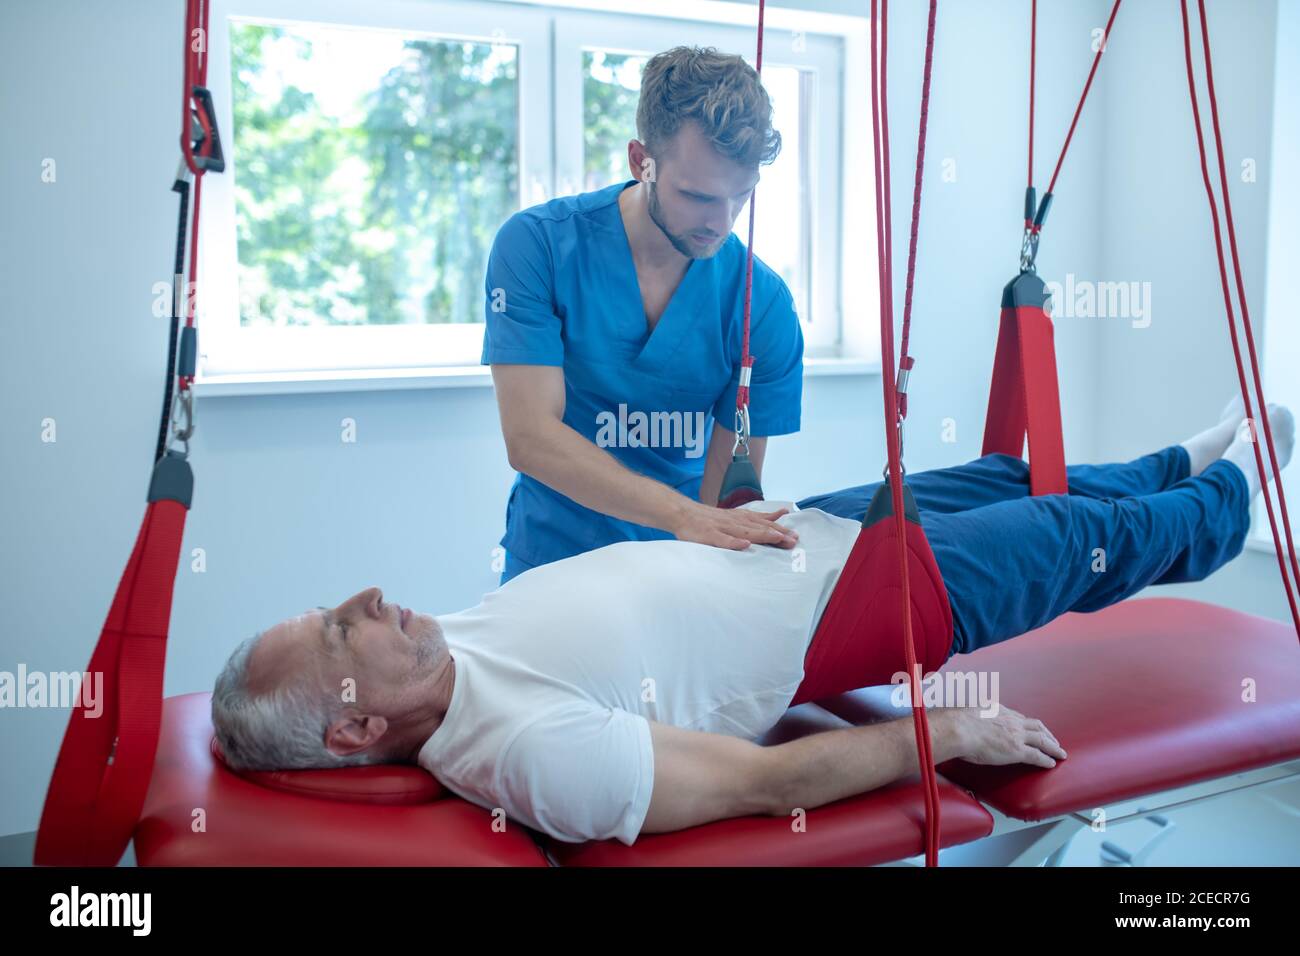 Male doctor touching stomach of lying patient Stock Photo